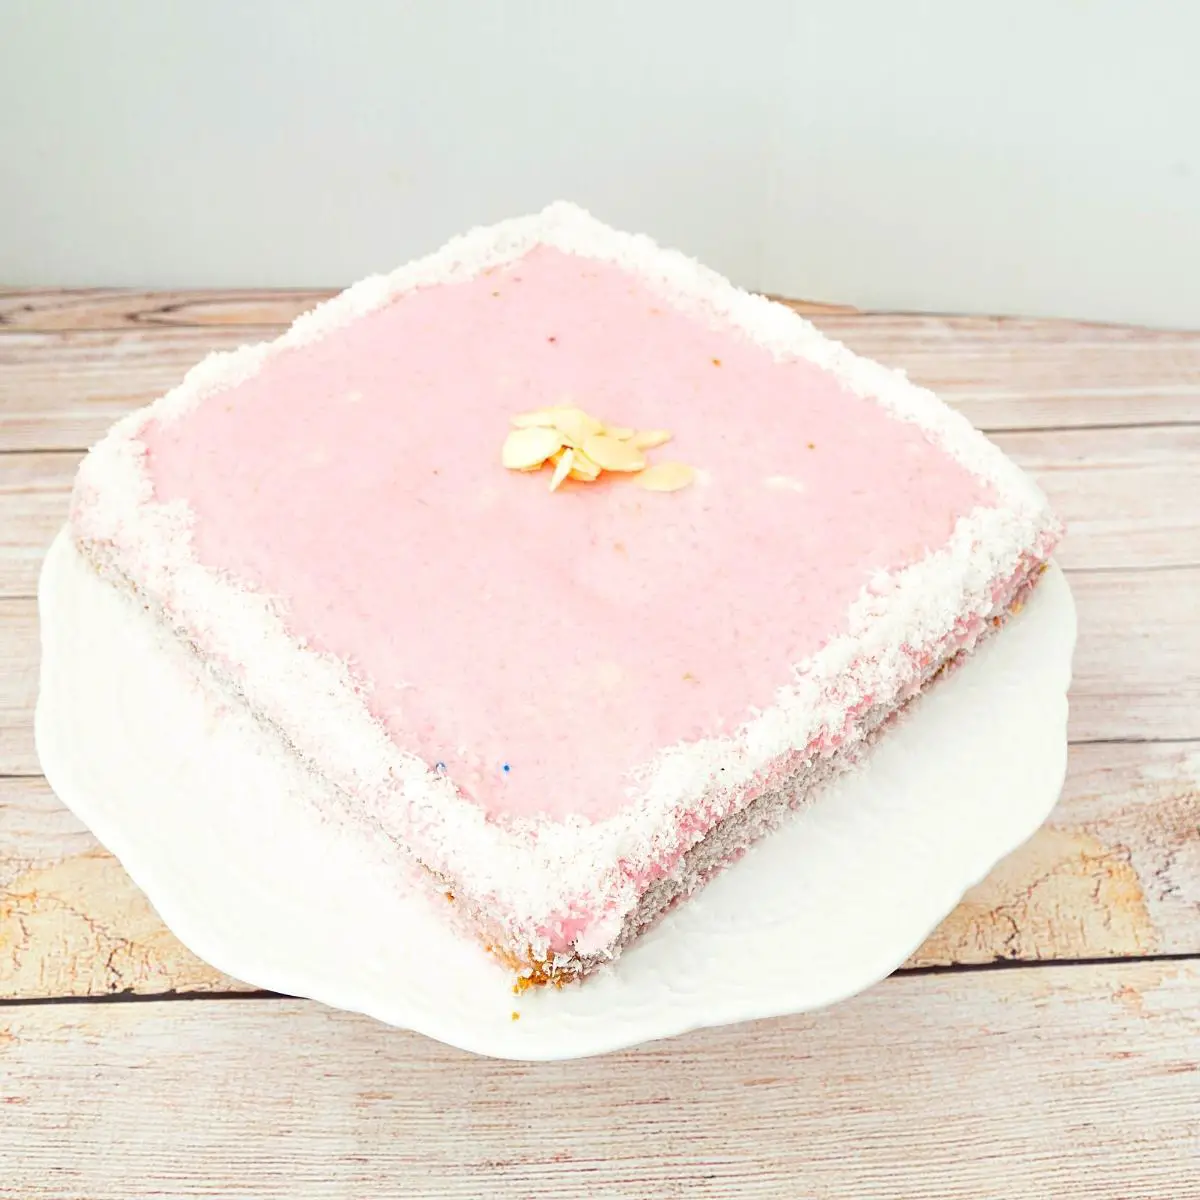 A square cake frosted with sugar glaze.